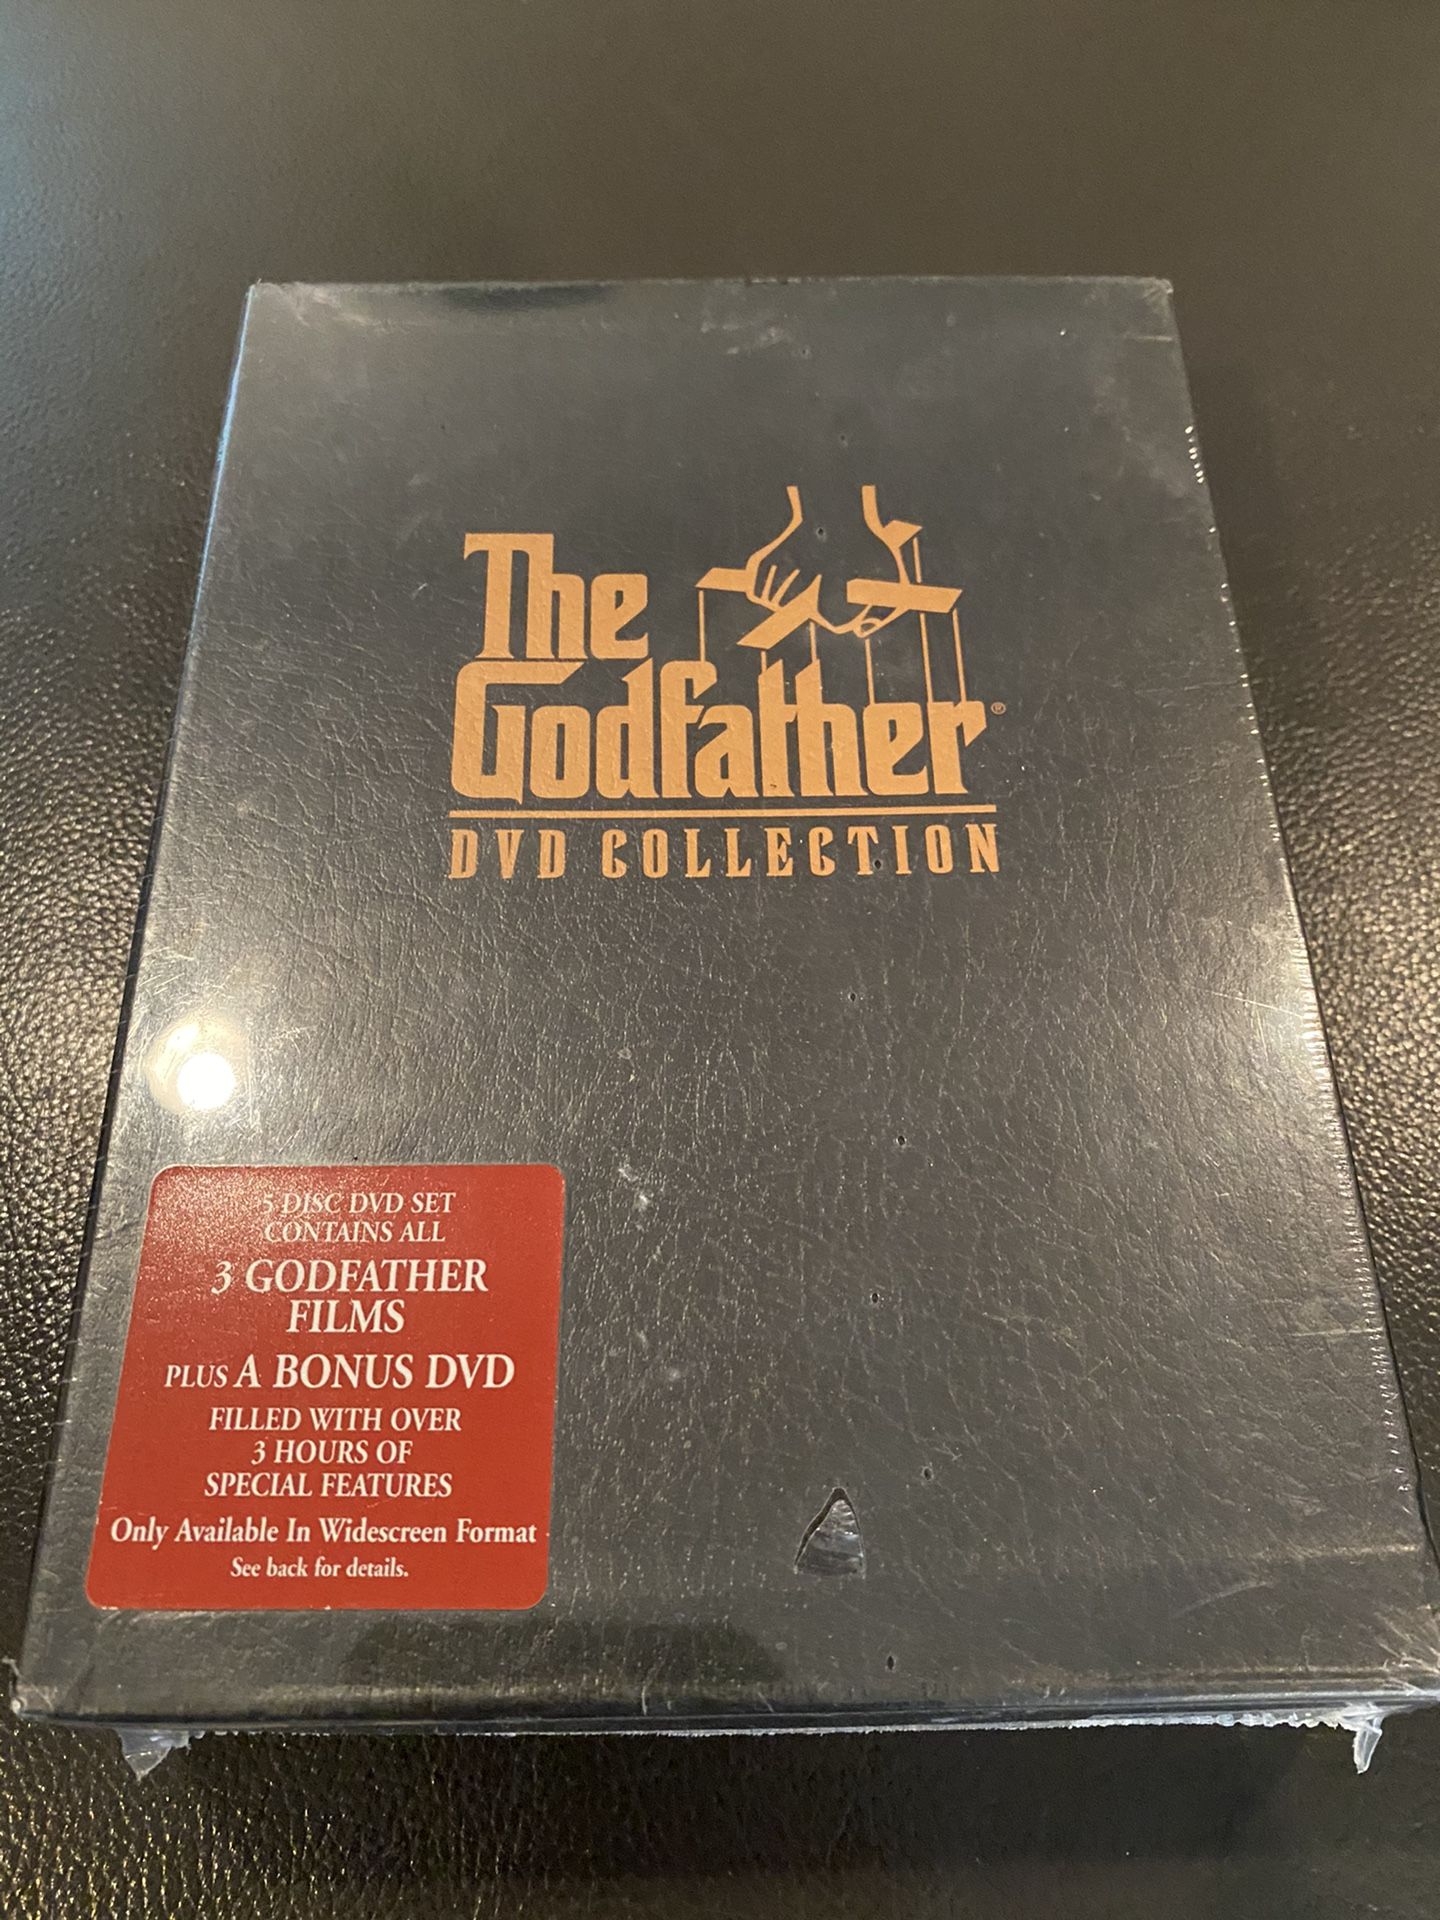 Godfather Series on DVD (unopened & still shrink-wrapped)